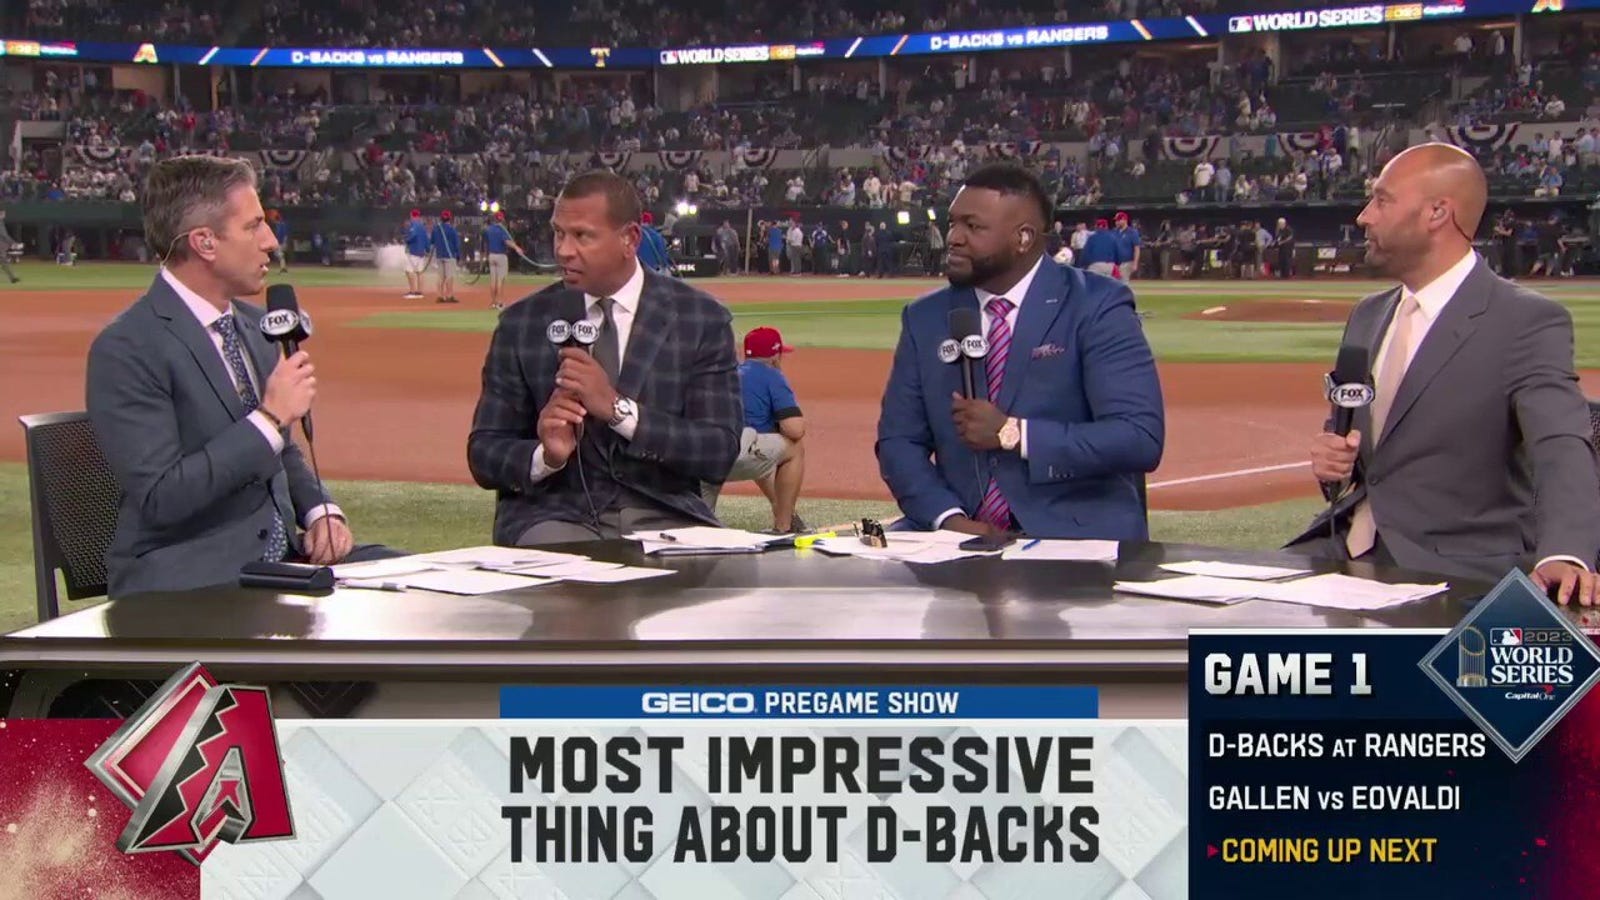 'All they do is win' - Derek Jeter and the 'MLB on FOX' crew break down the most impressive thing about the Diamondbacks